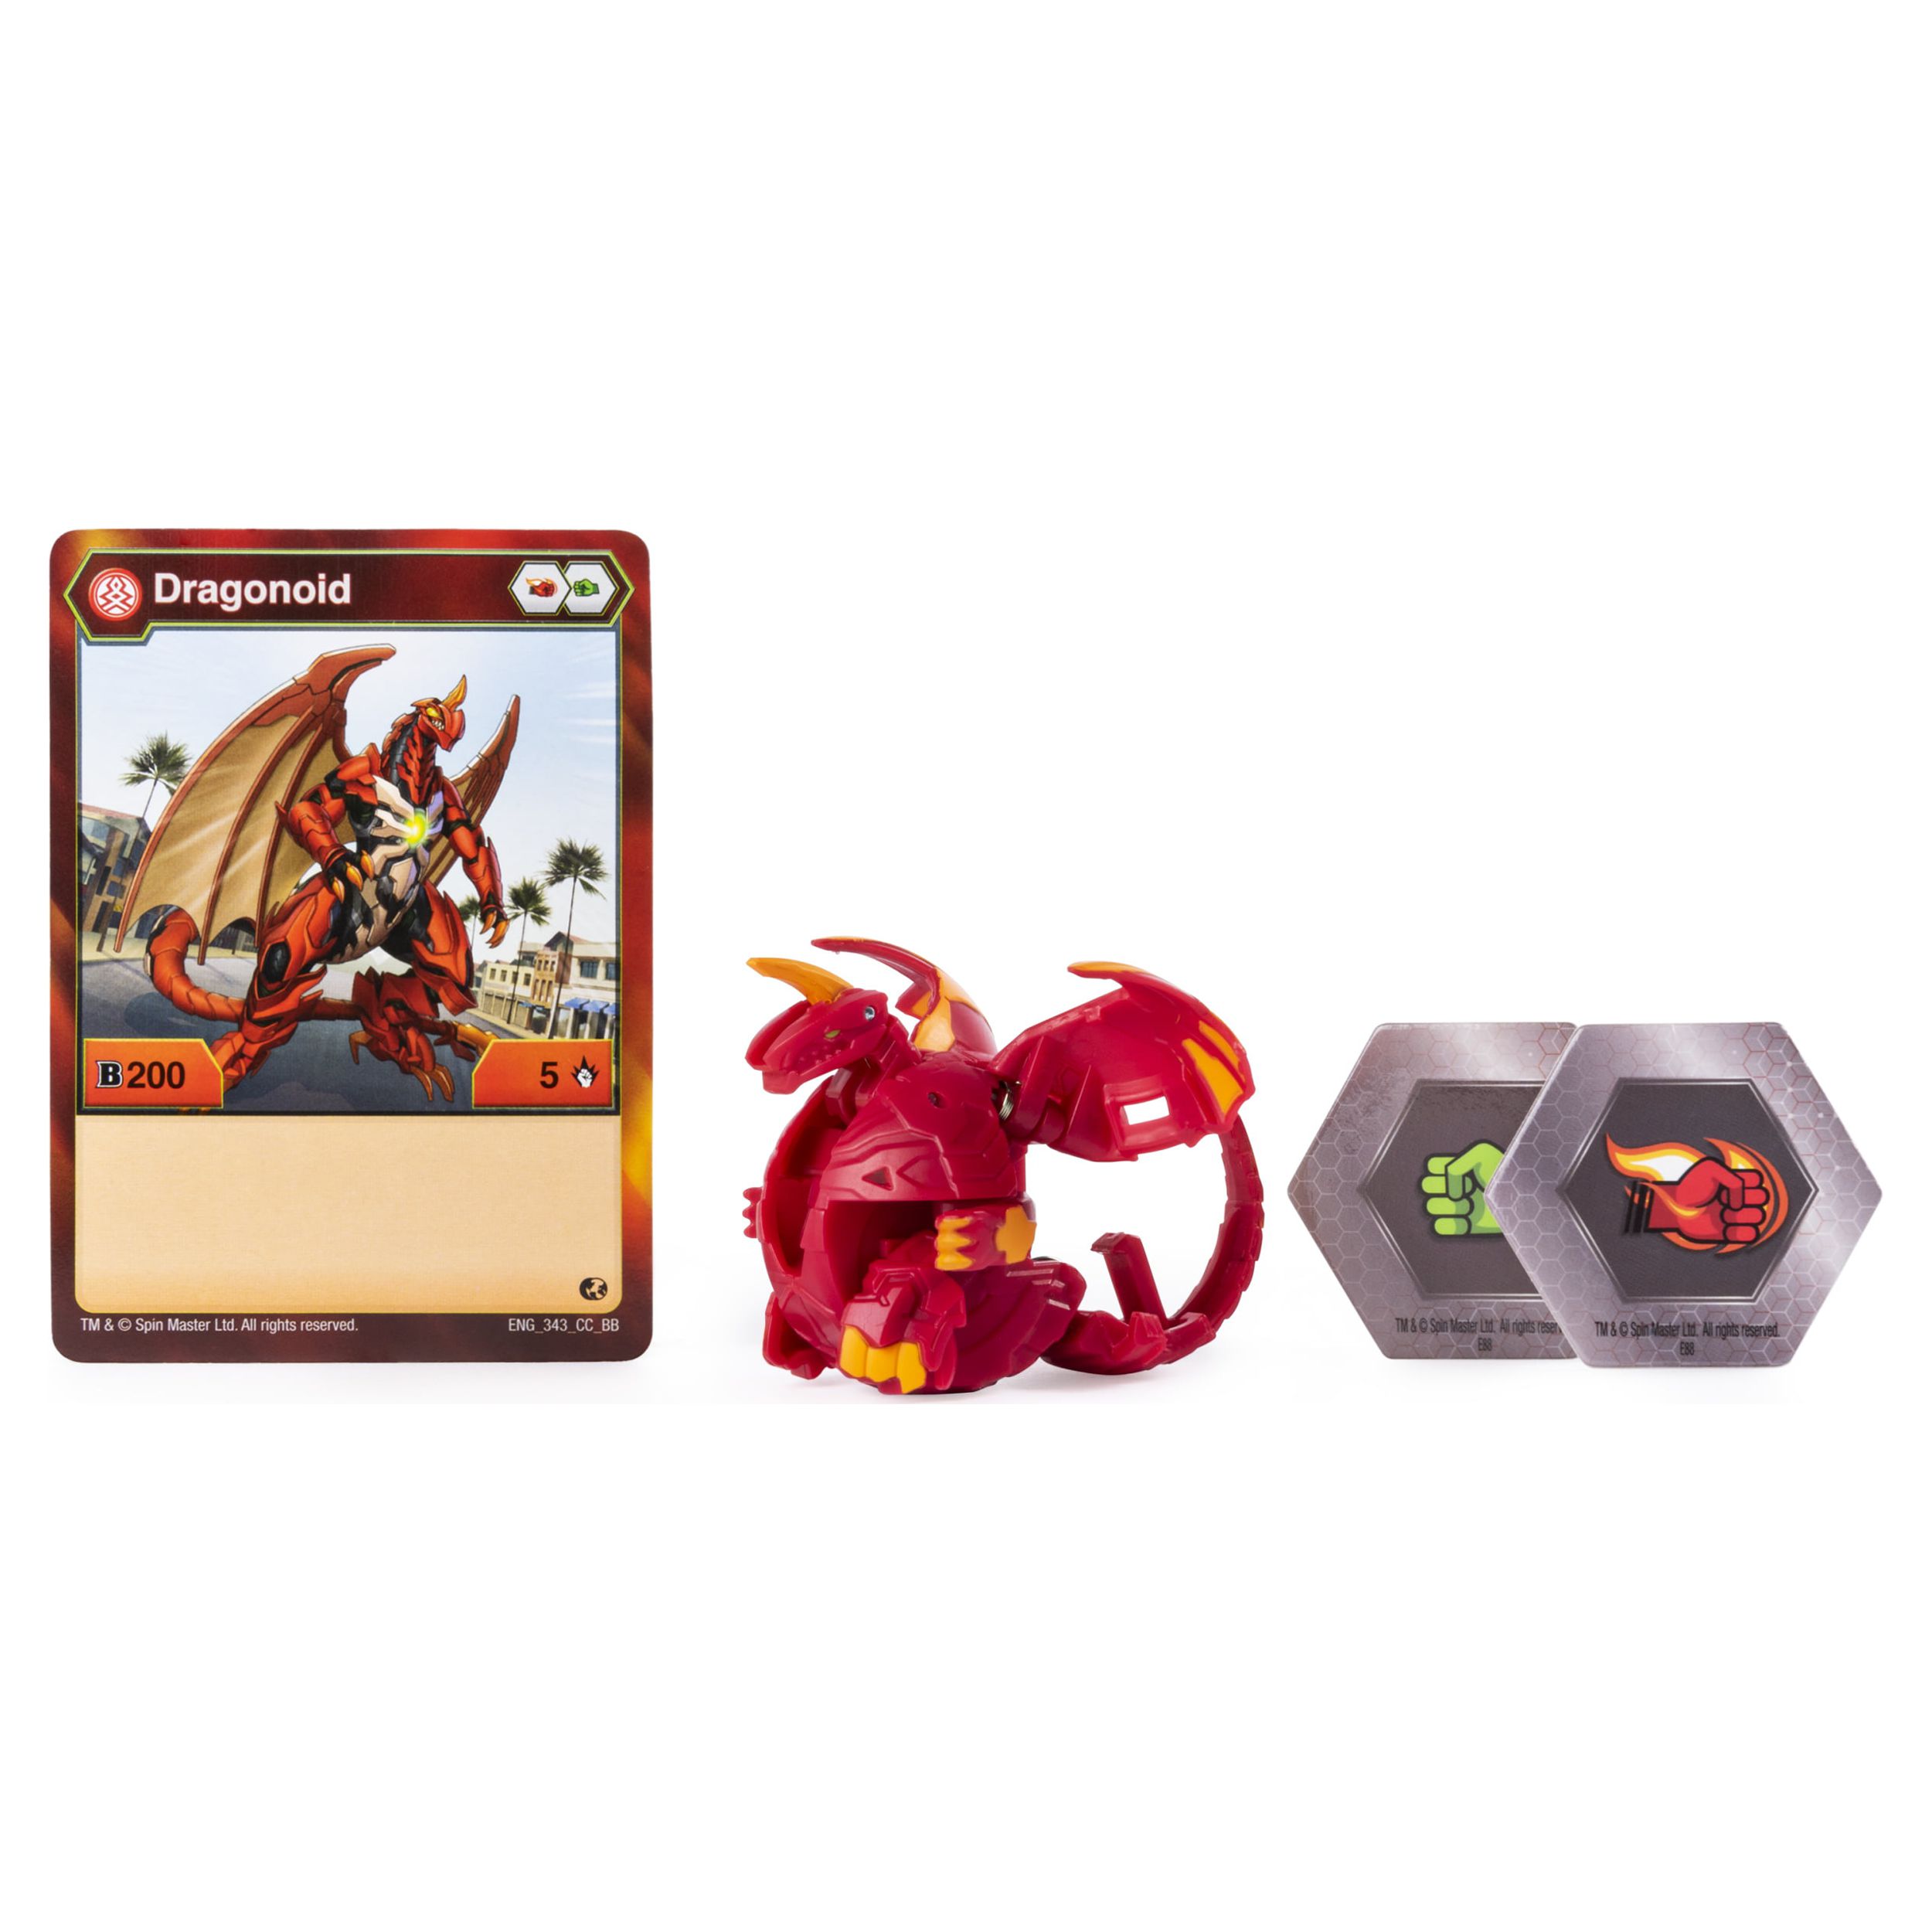 Bakugan, Dragonoid, 2-inch Tall Collectible Action Figure and Trading Card, for Ages 6 and Up - image 2 of 5